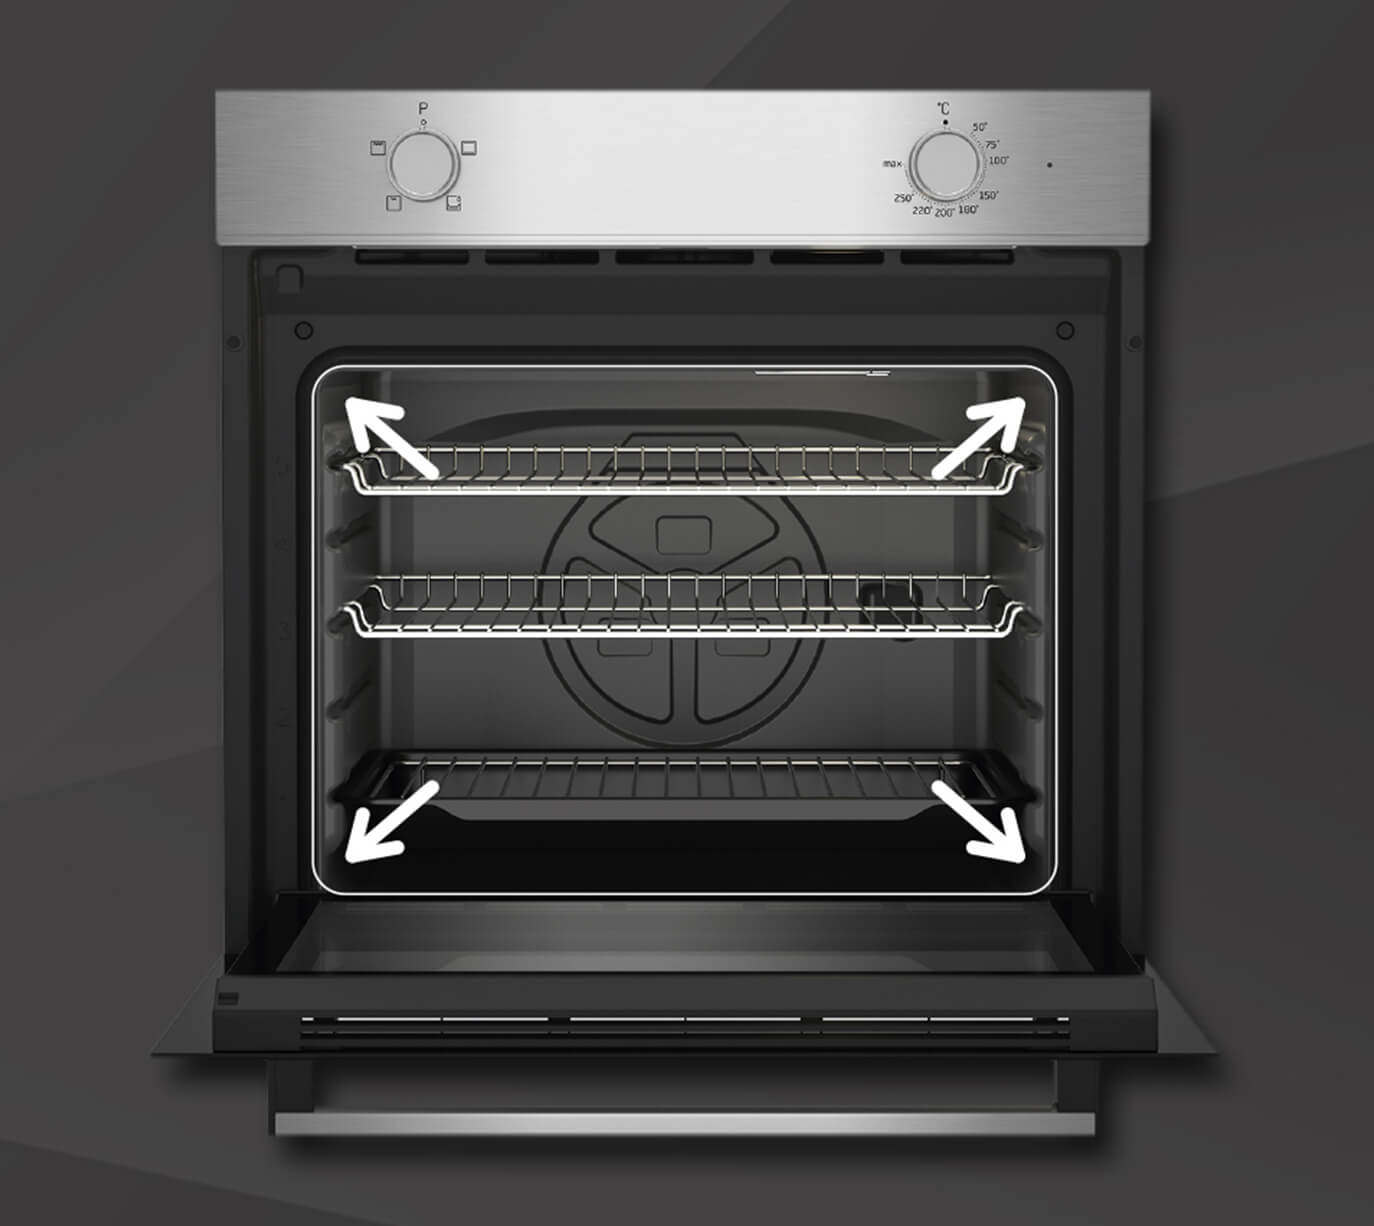 Large 74L Oven Capacity